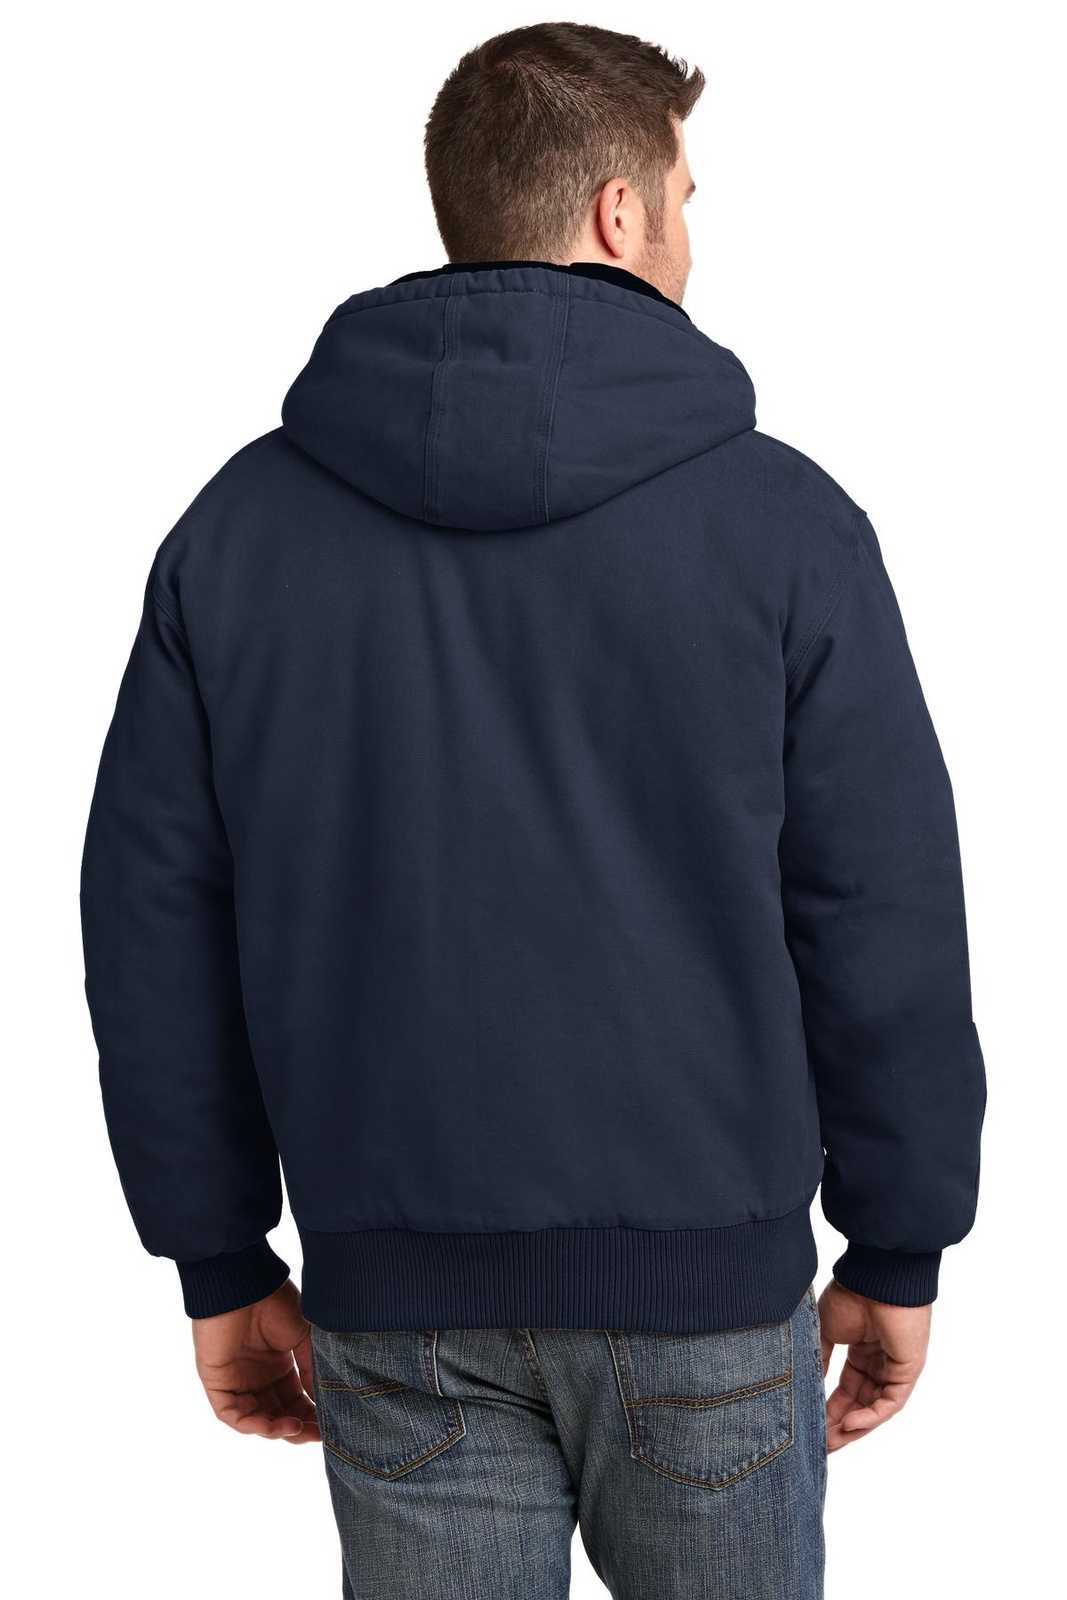 CornerStone CSJ41 Washed Duck Cloth Insulated Hooded Work Jacket - Navy - HIT a Double - 2